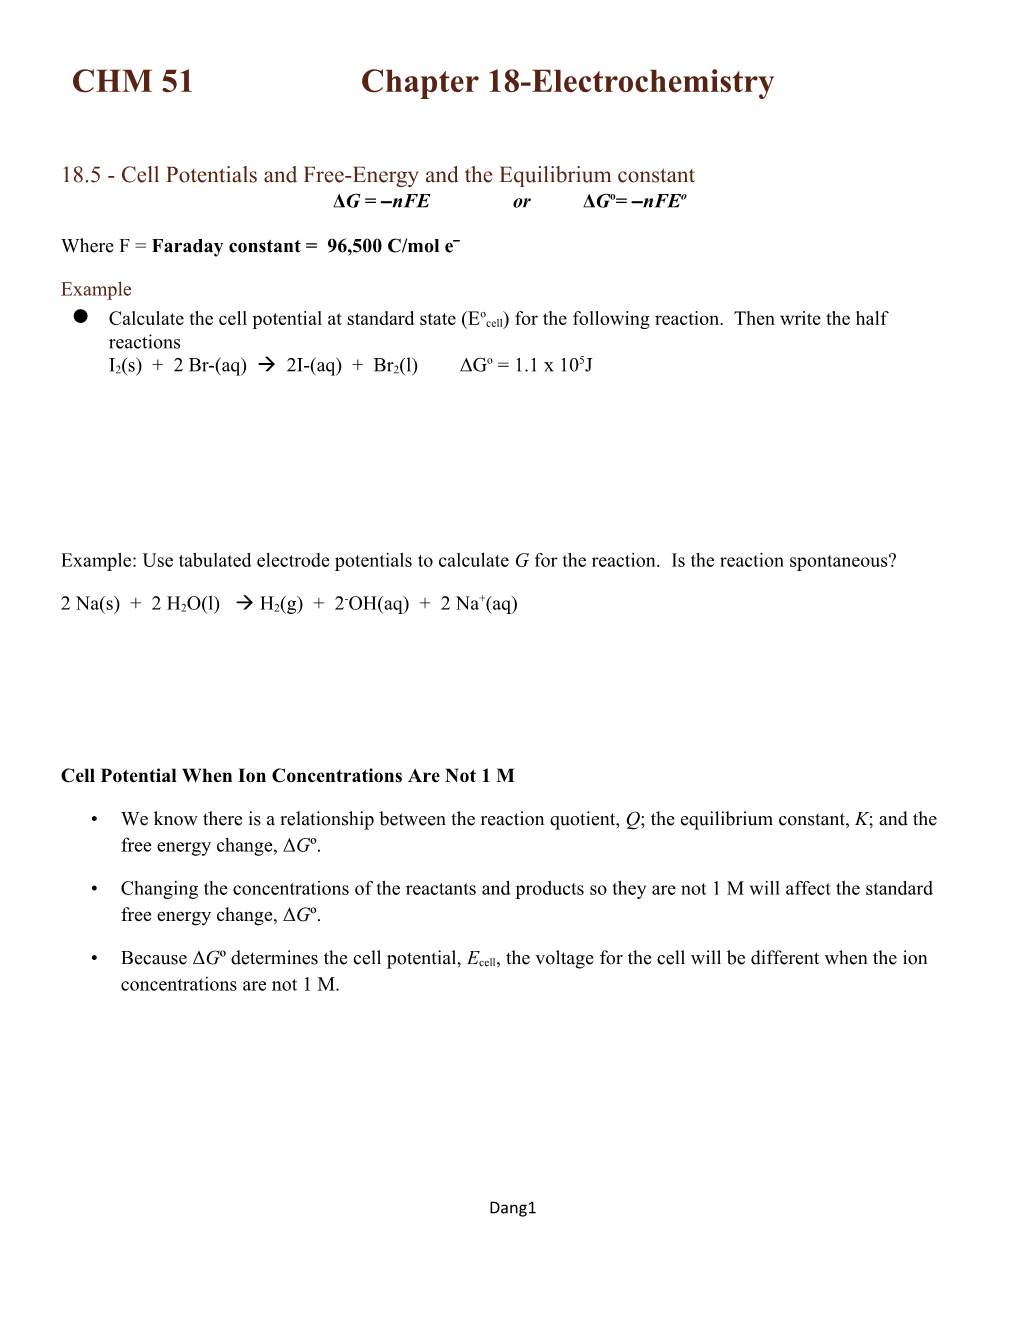 18.5 - Cell Potentials and Free-Energy and the Equilibrium Constant